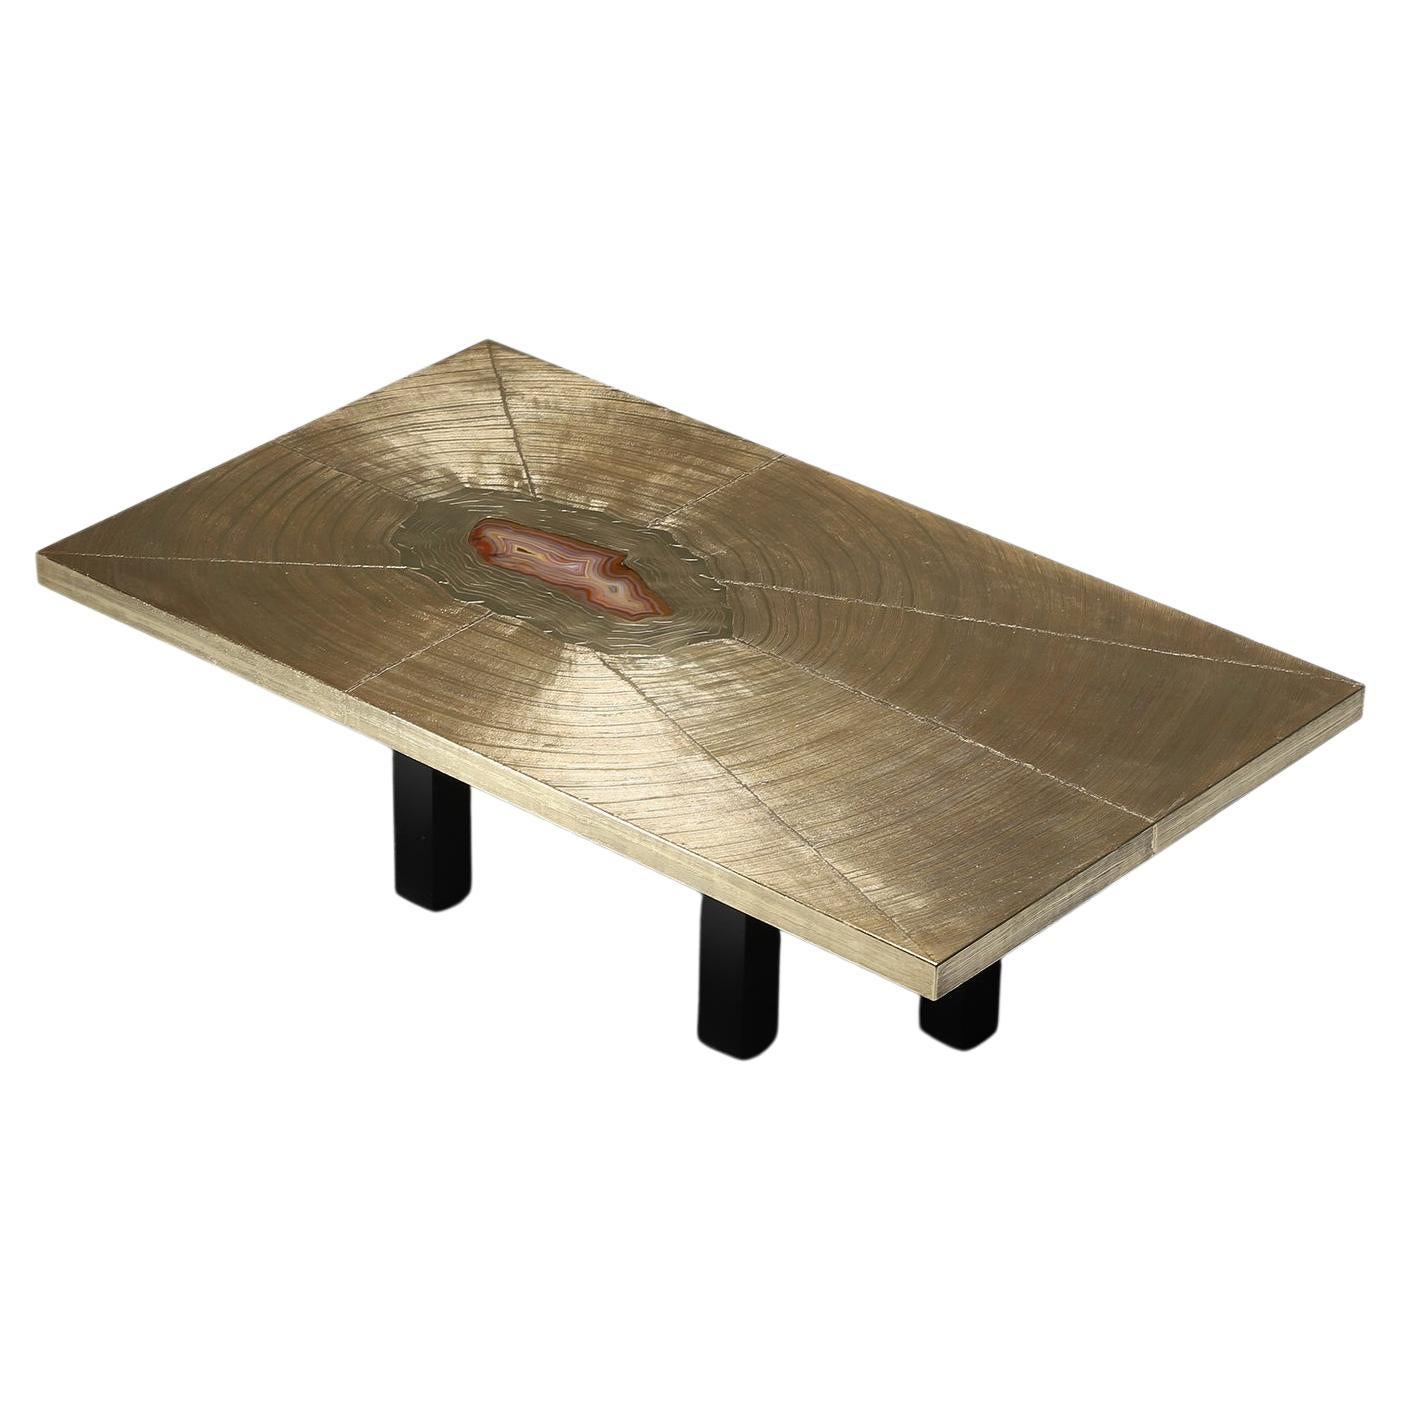 Etched Coffee Table with Agathe Stone by Georges Mathias, Lova Creation Belgium